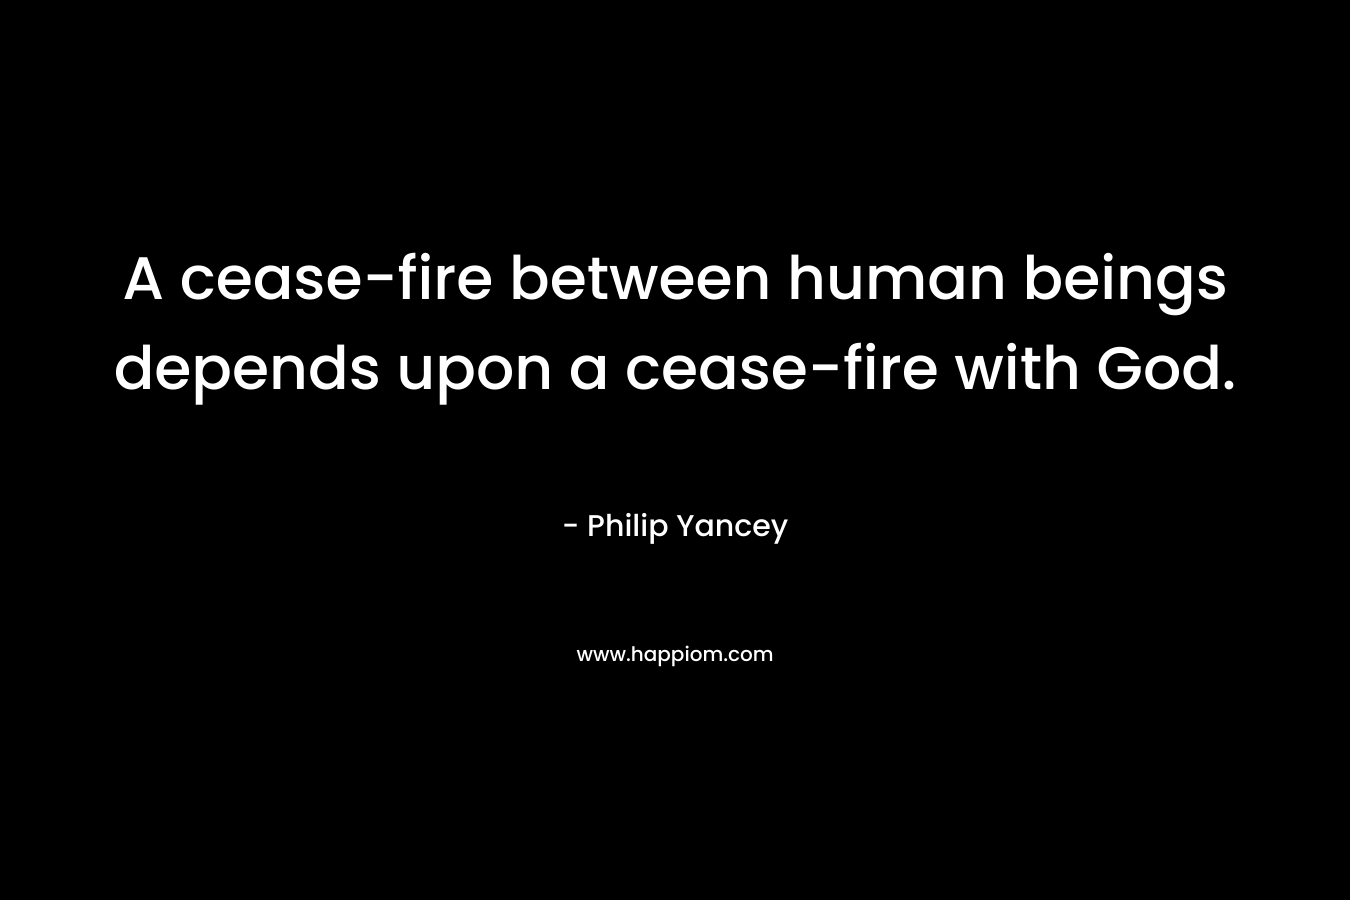 A cease-fire between human beings depends upon a cease-fire with God. – Philip Yancey